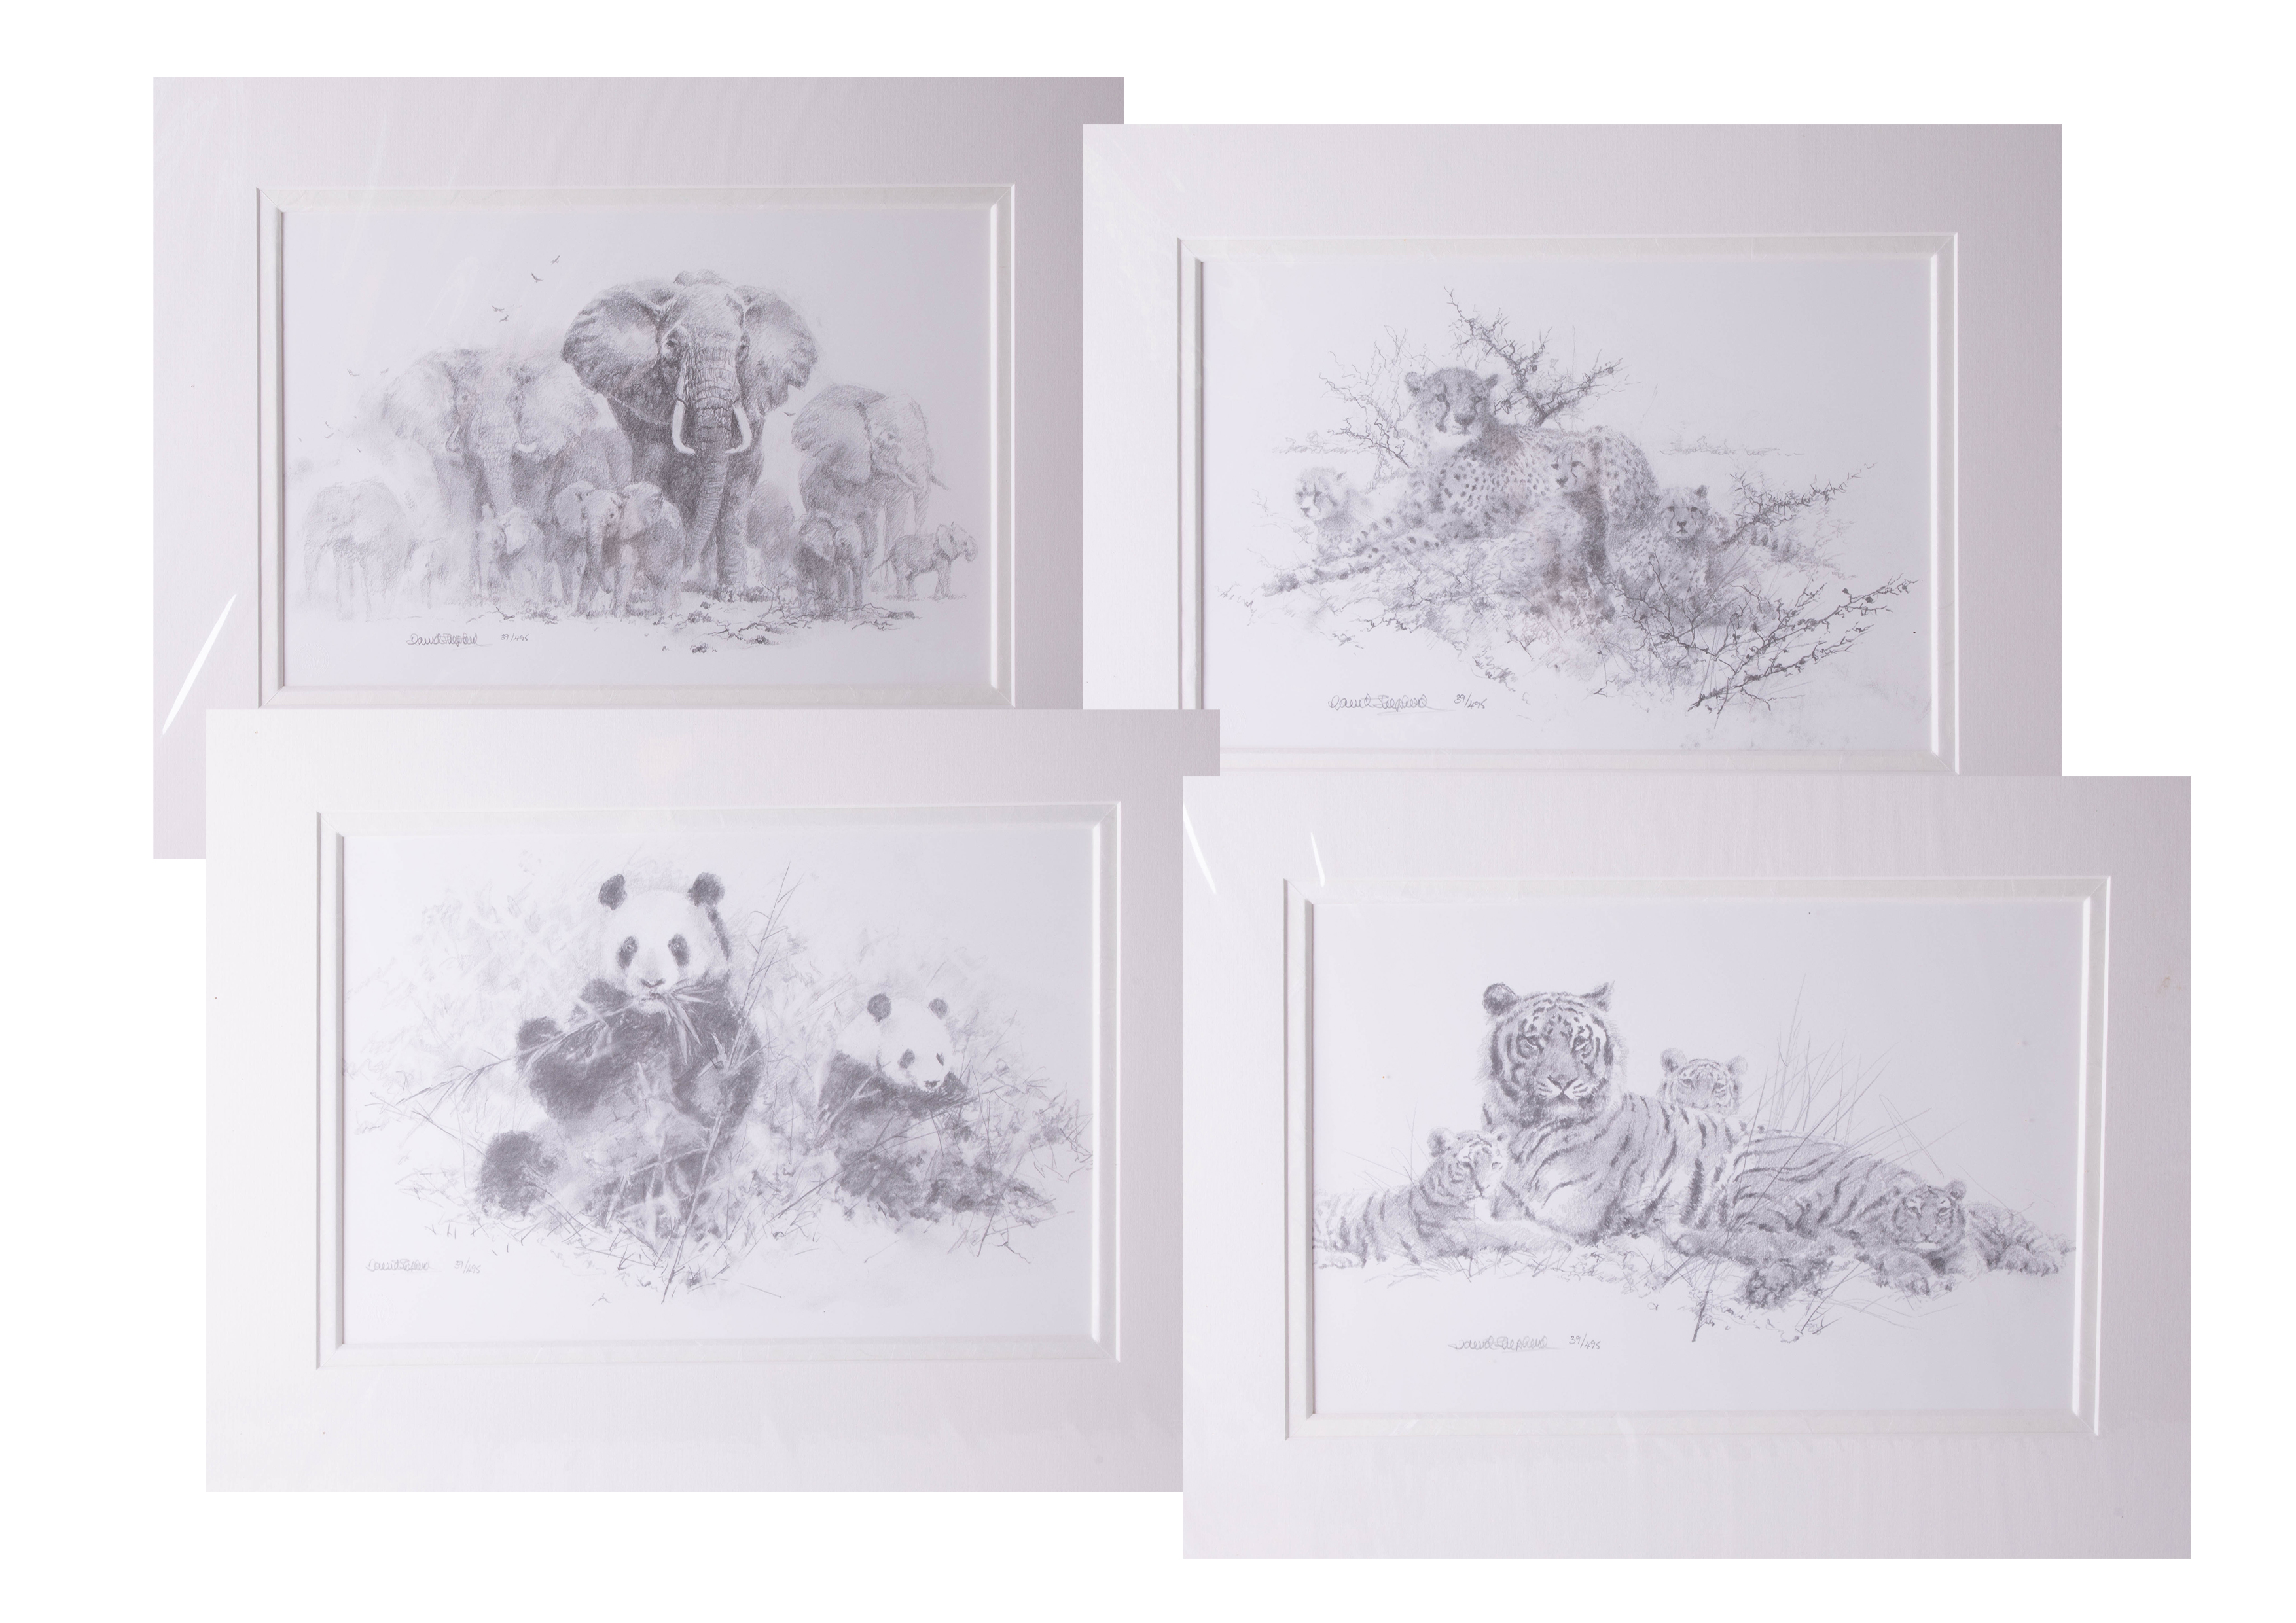 David Shepherd, a portfolio of 4 prints of pencil drawings published by Solomon & Whitehead titled